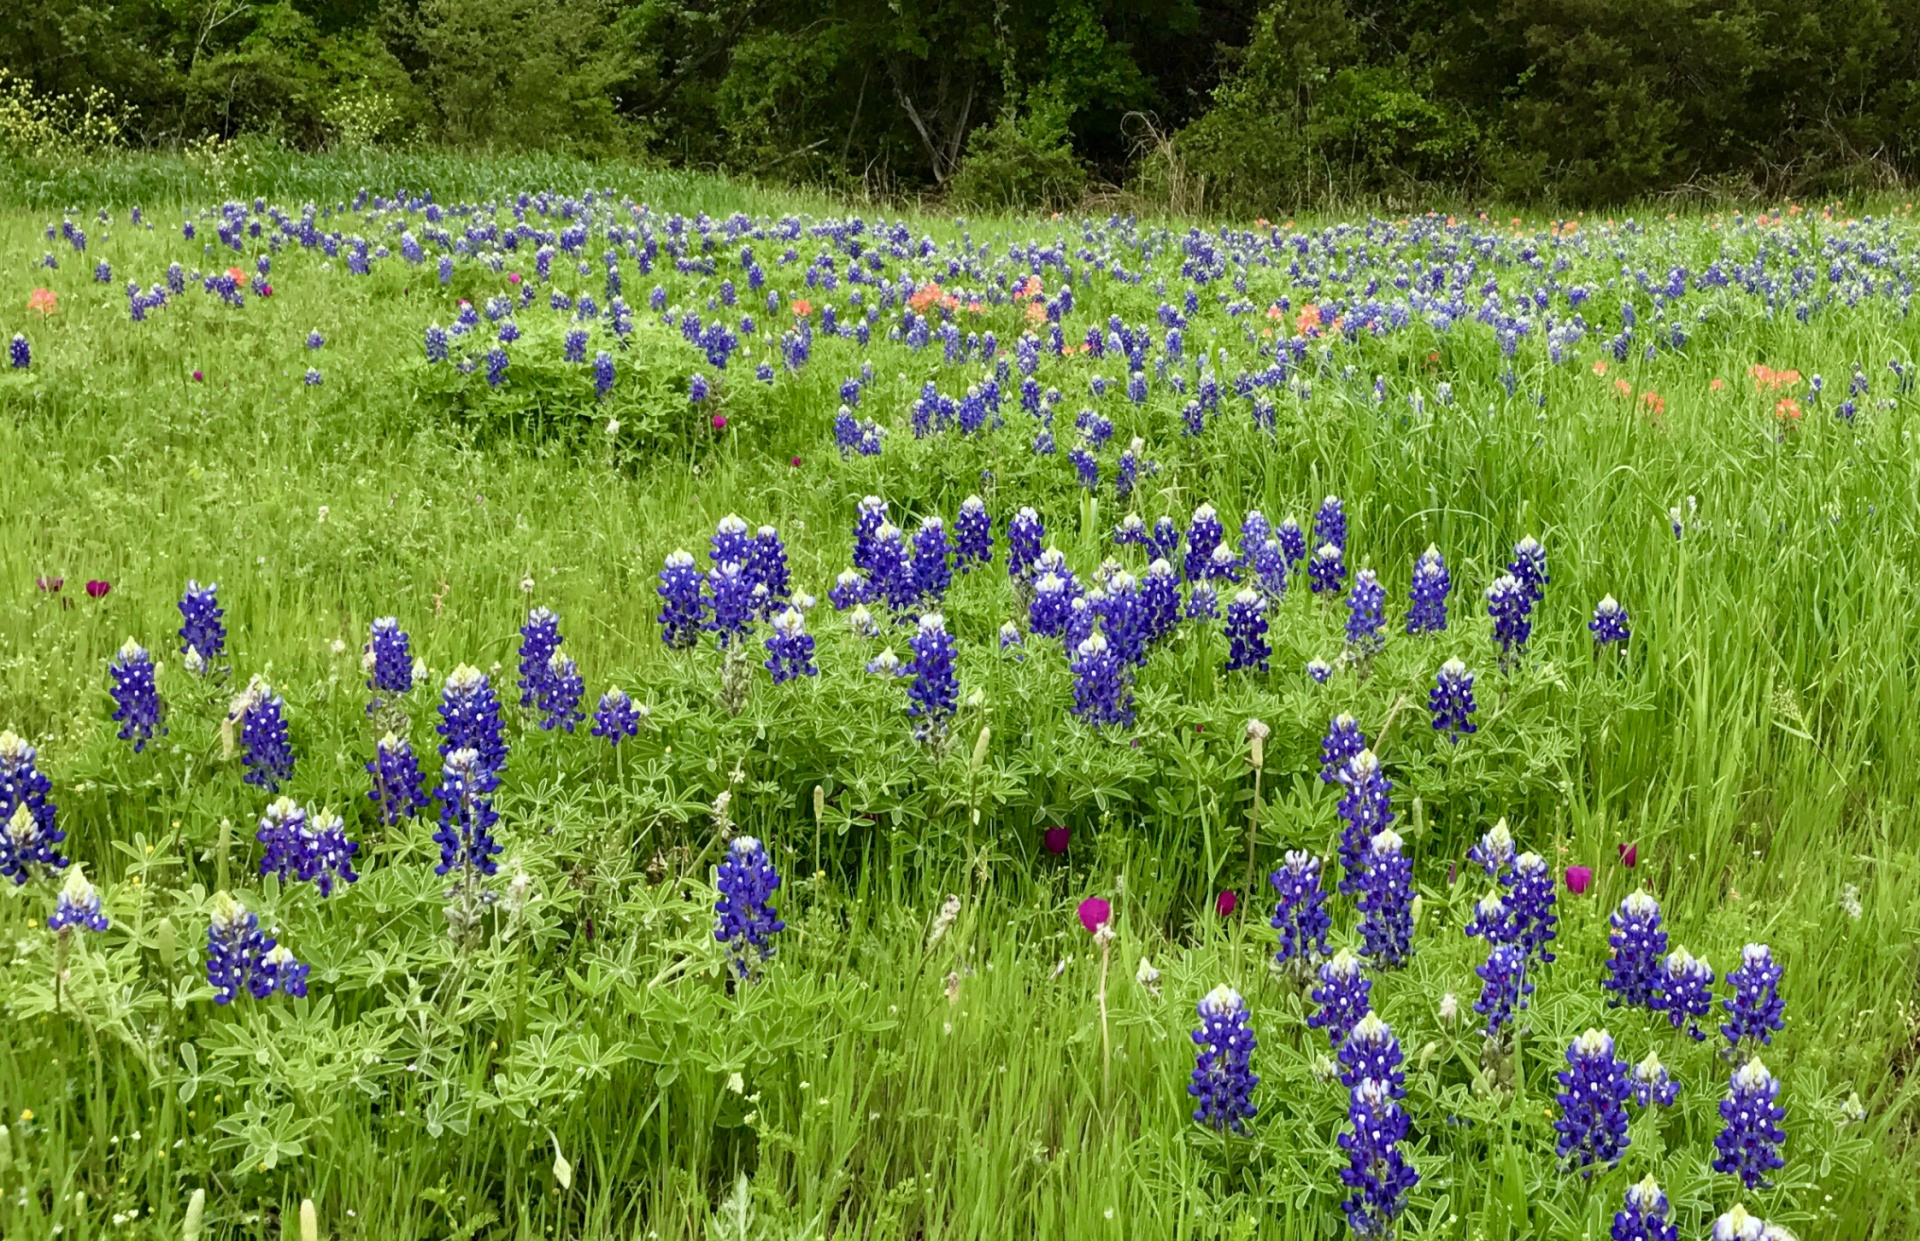 Bluebonnets and wildflowers